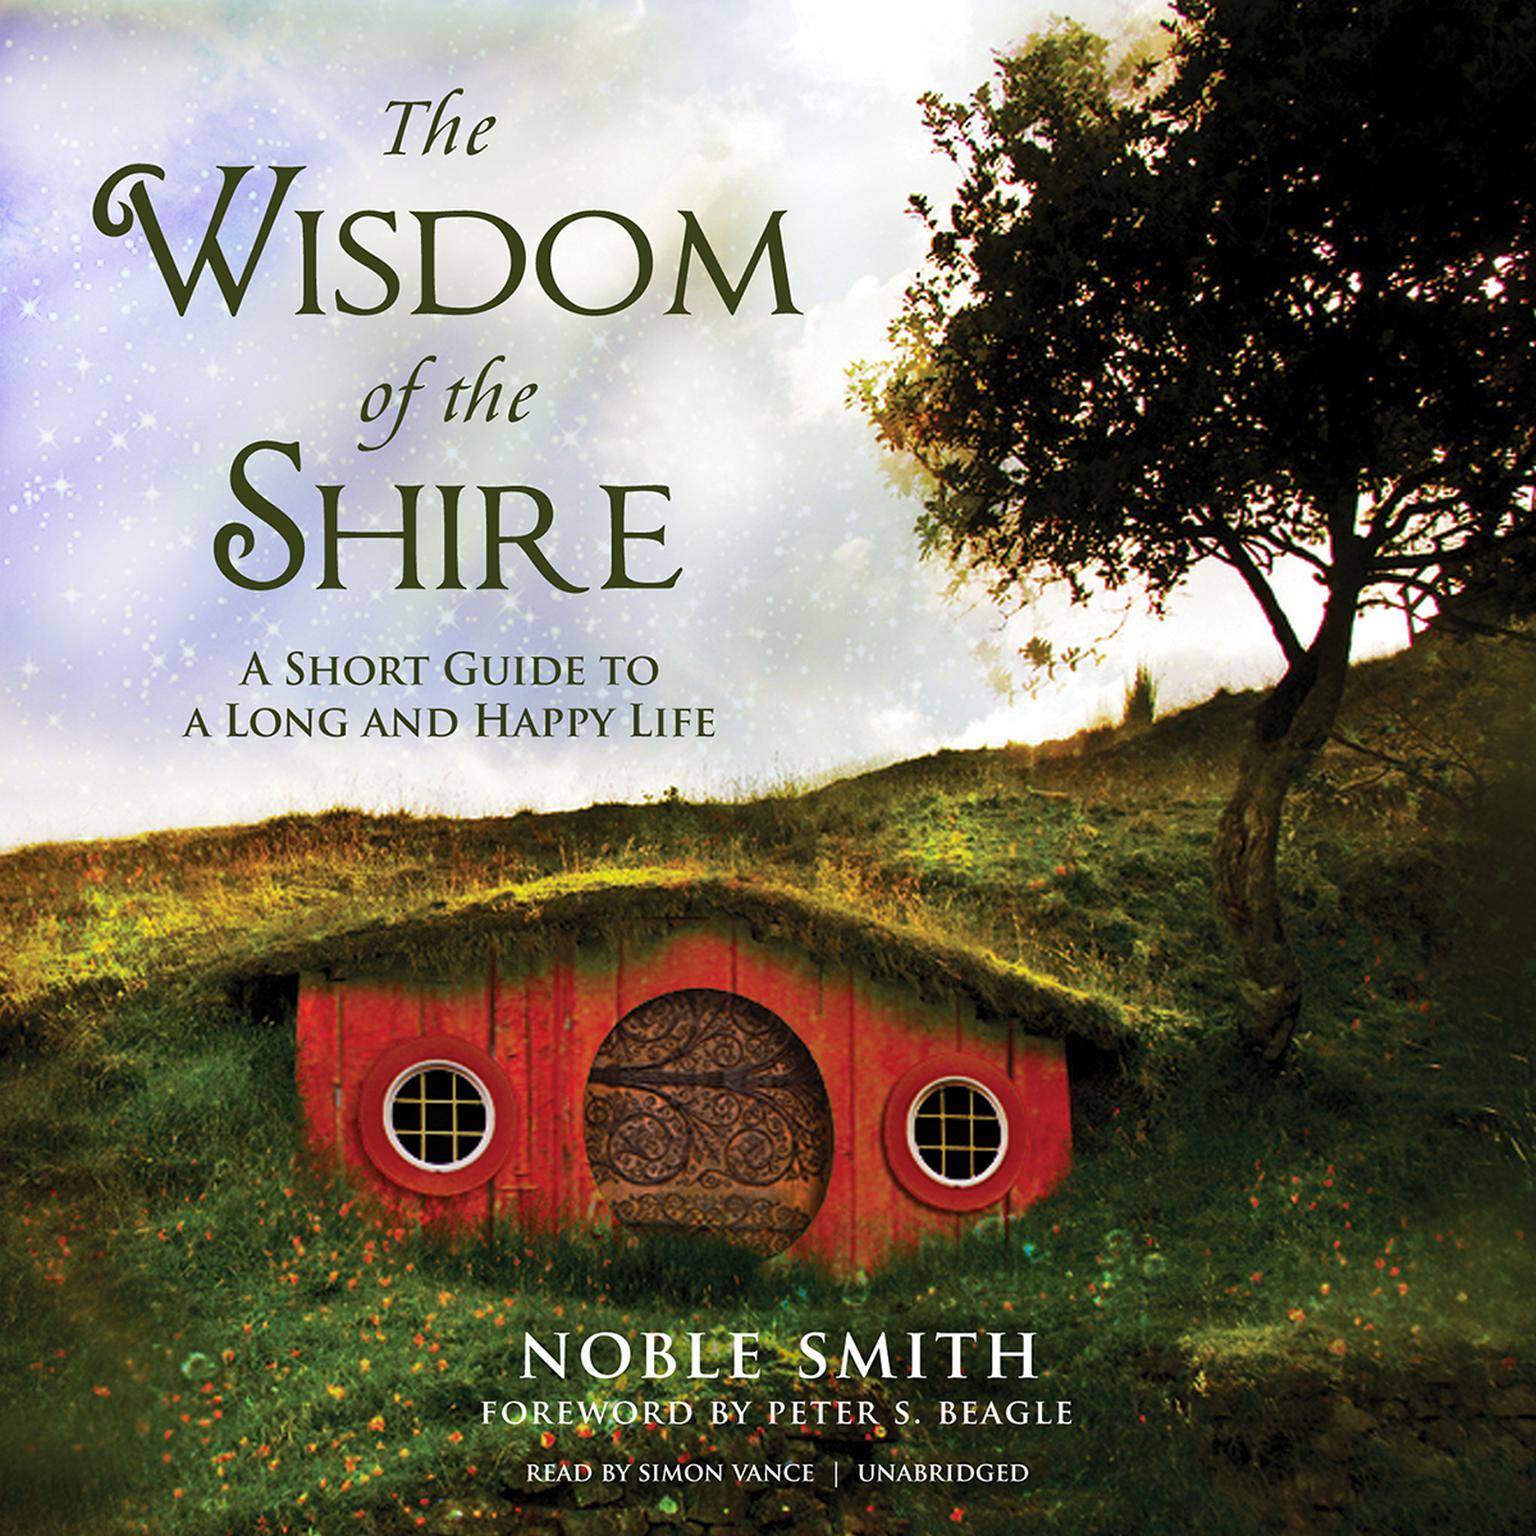 The Wisdom of the Shire: A Short Guide to a Long and Happy Life Audiobook, by Noble Smith